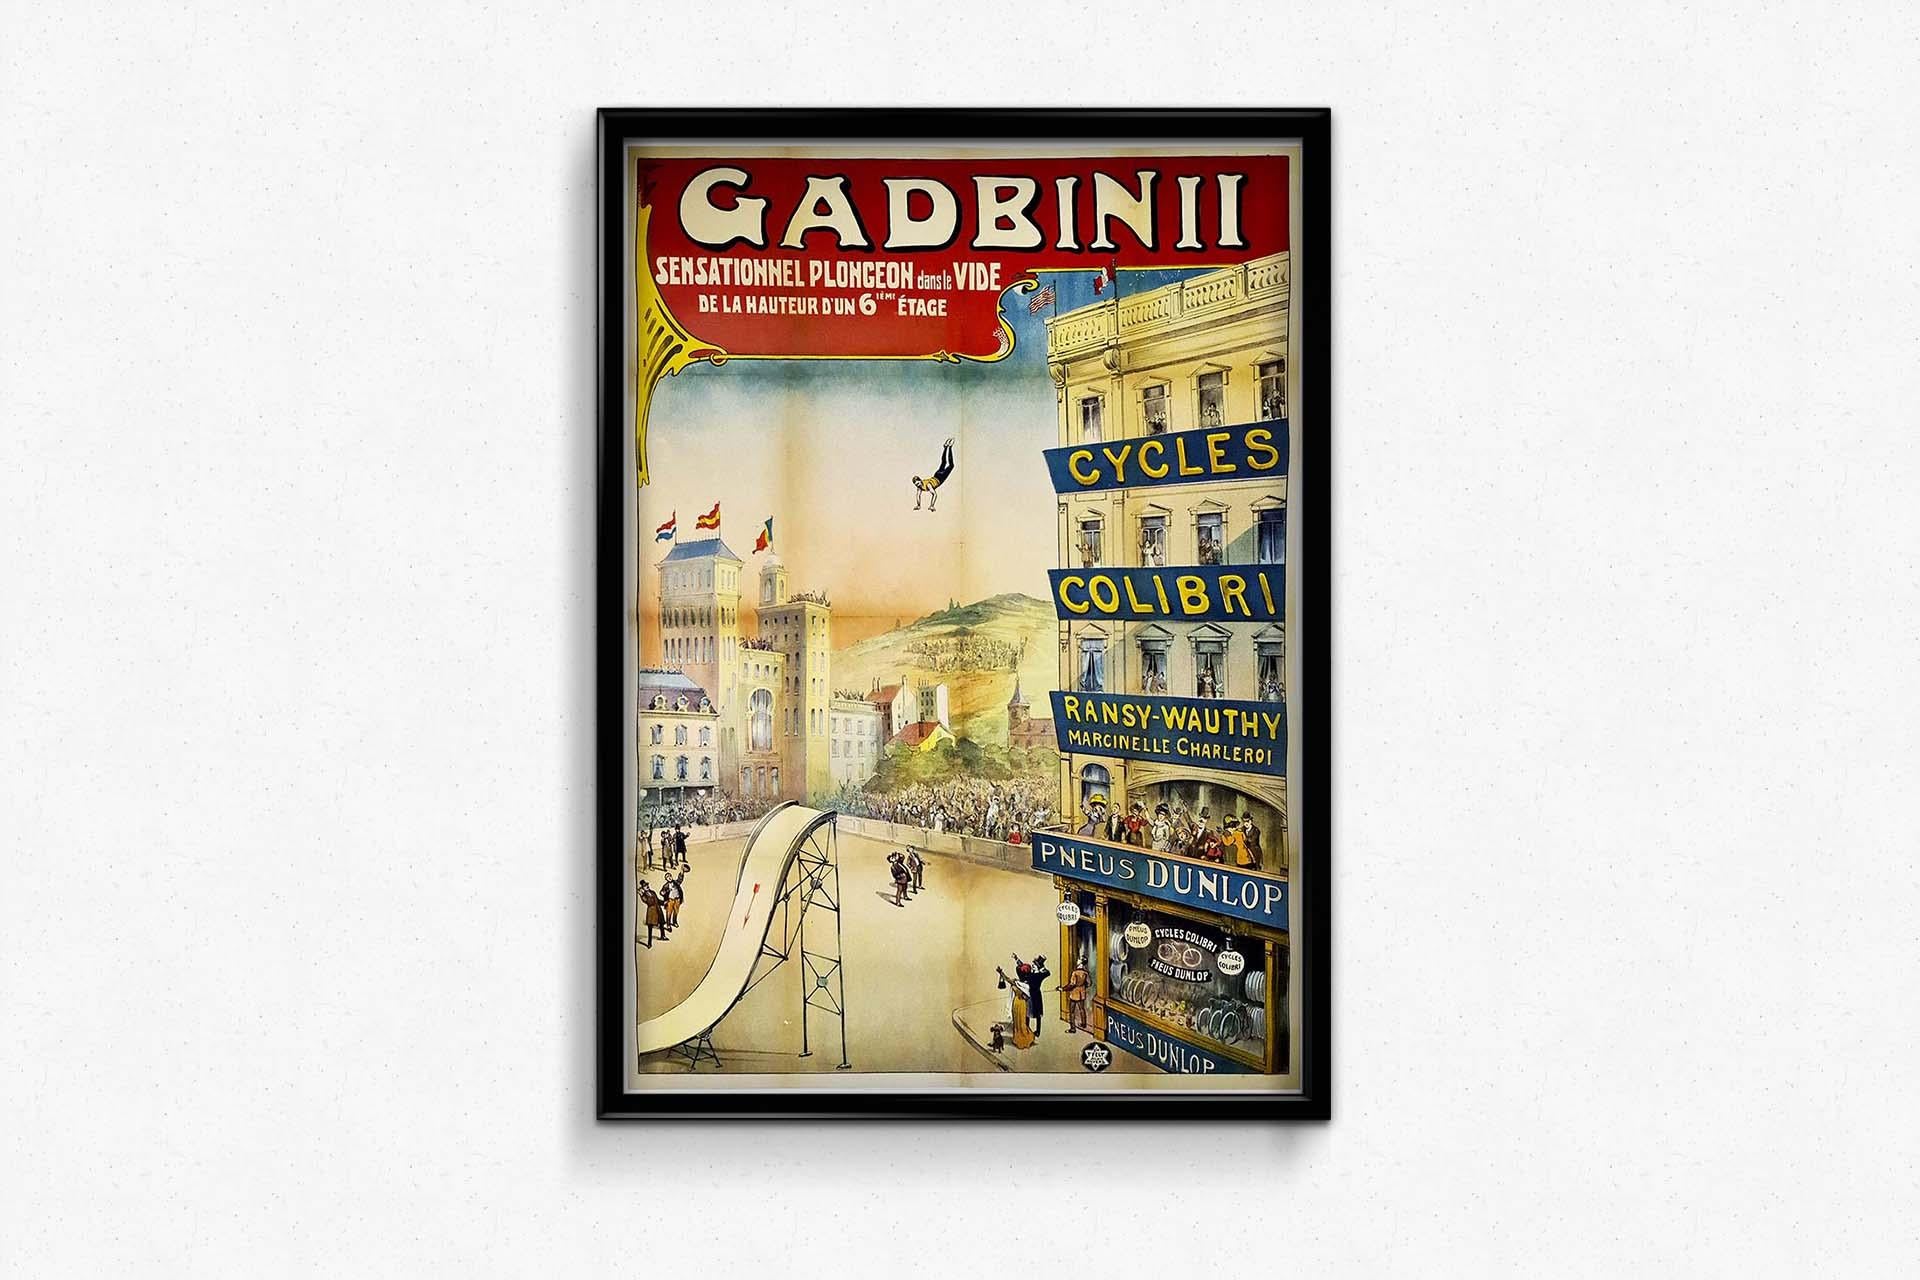 Original poster of the 30's for the Gadbini show and its sensational dive For Sale 2